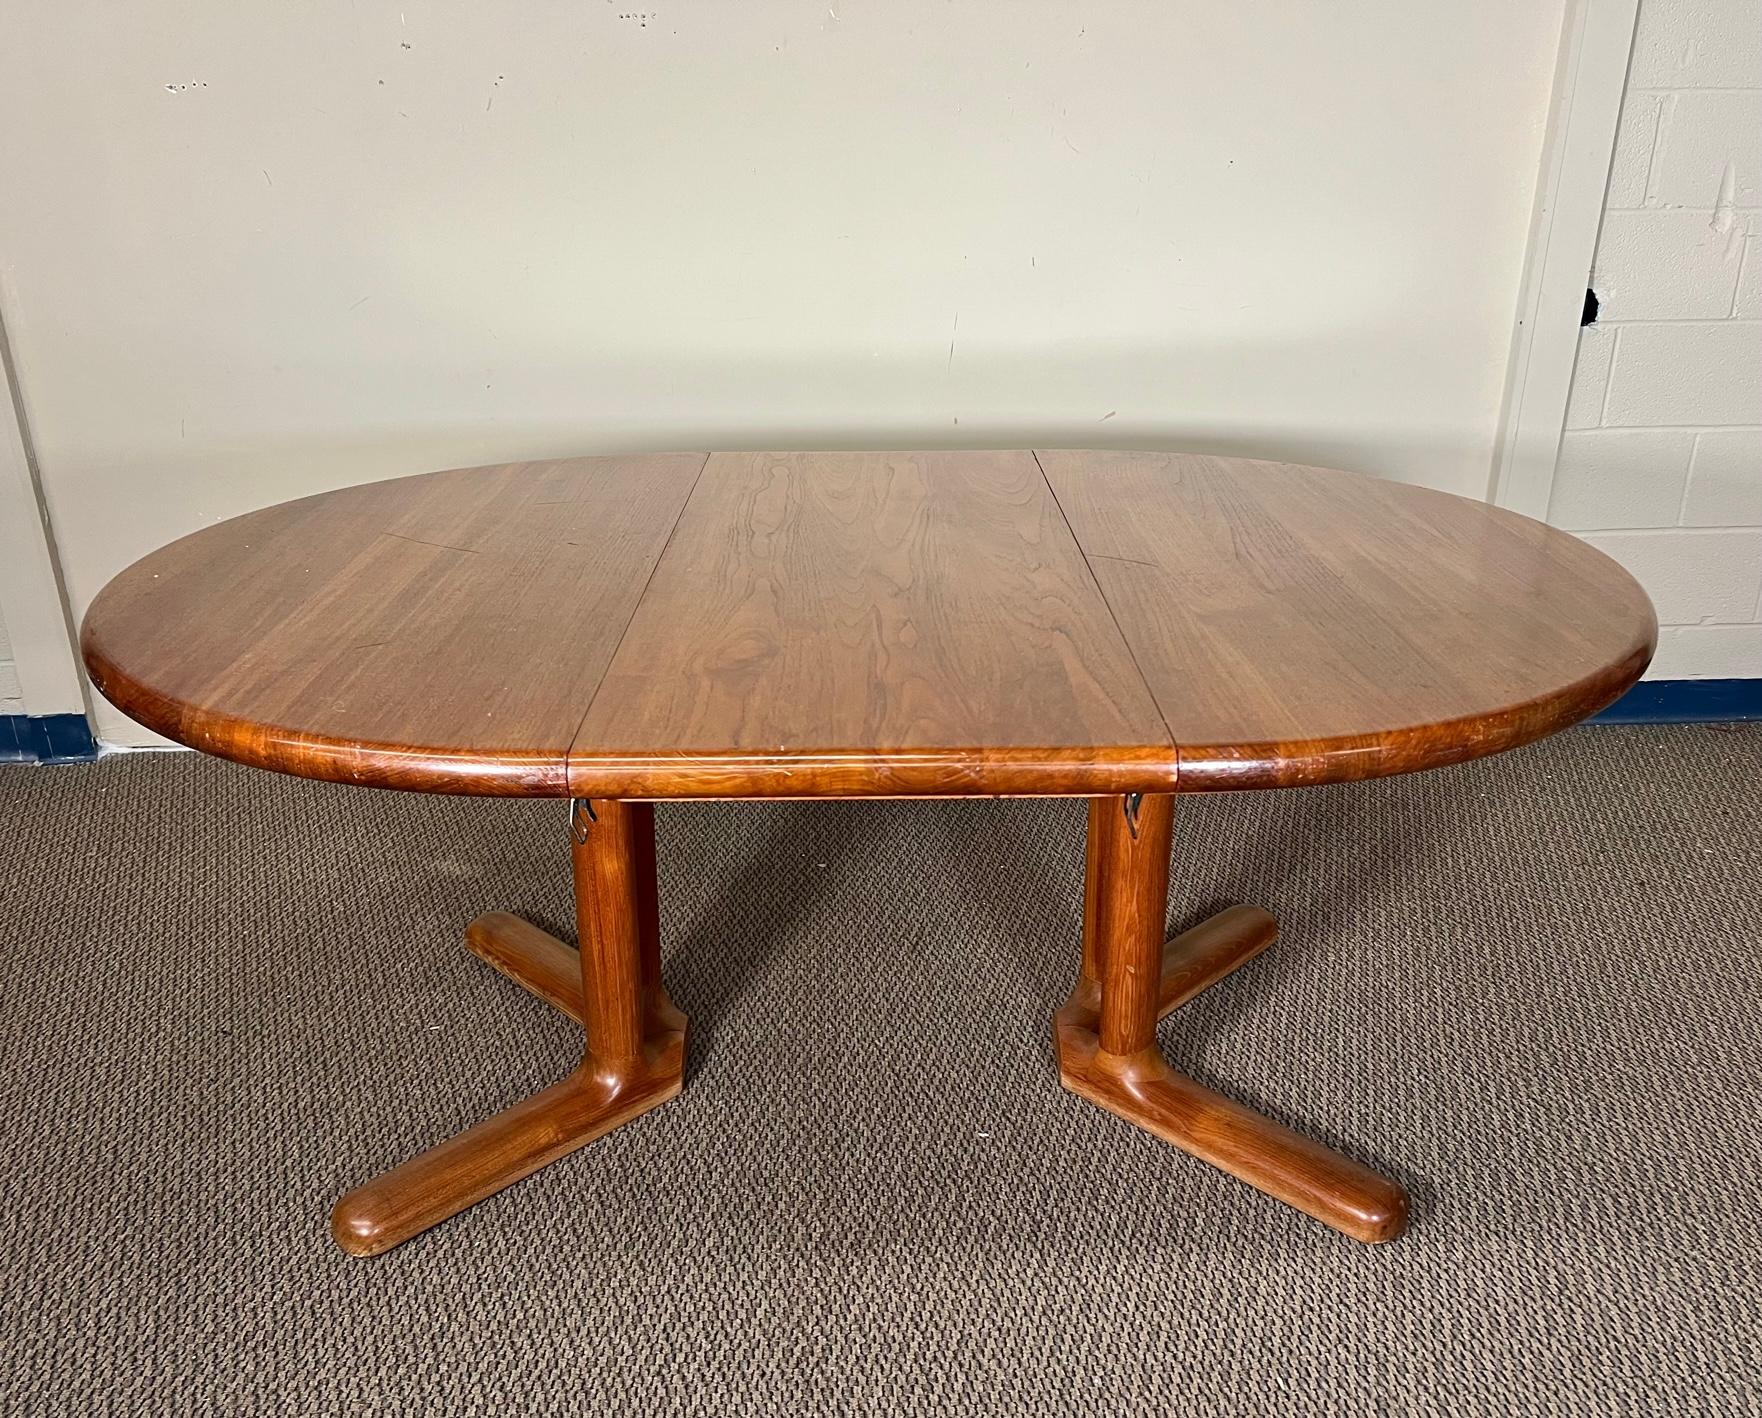 This is a round Danish teak dining table with 1 extension leaf. It originally may have had 2 extension leaves but came to us with only one. Very nice condition overall. Some scratches on the top and gouges on the side. Dimensions: 48.5